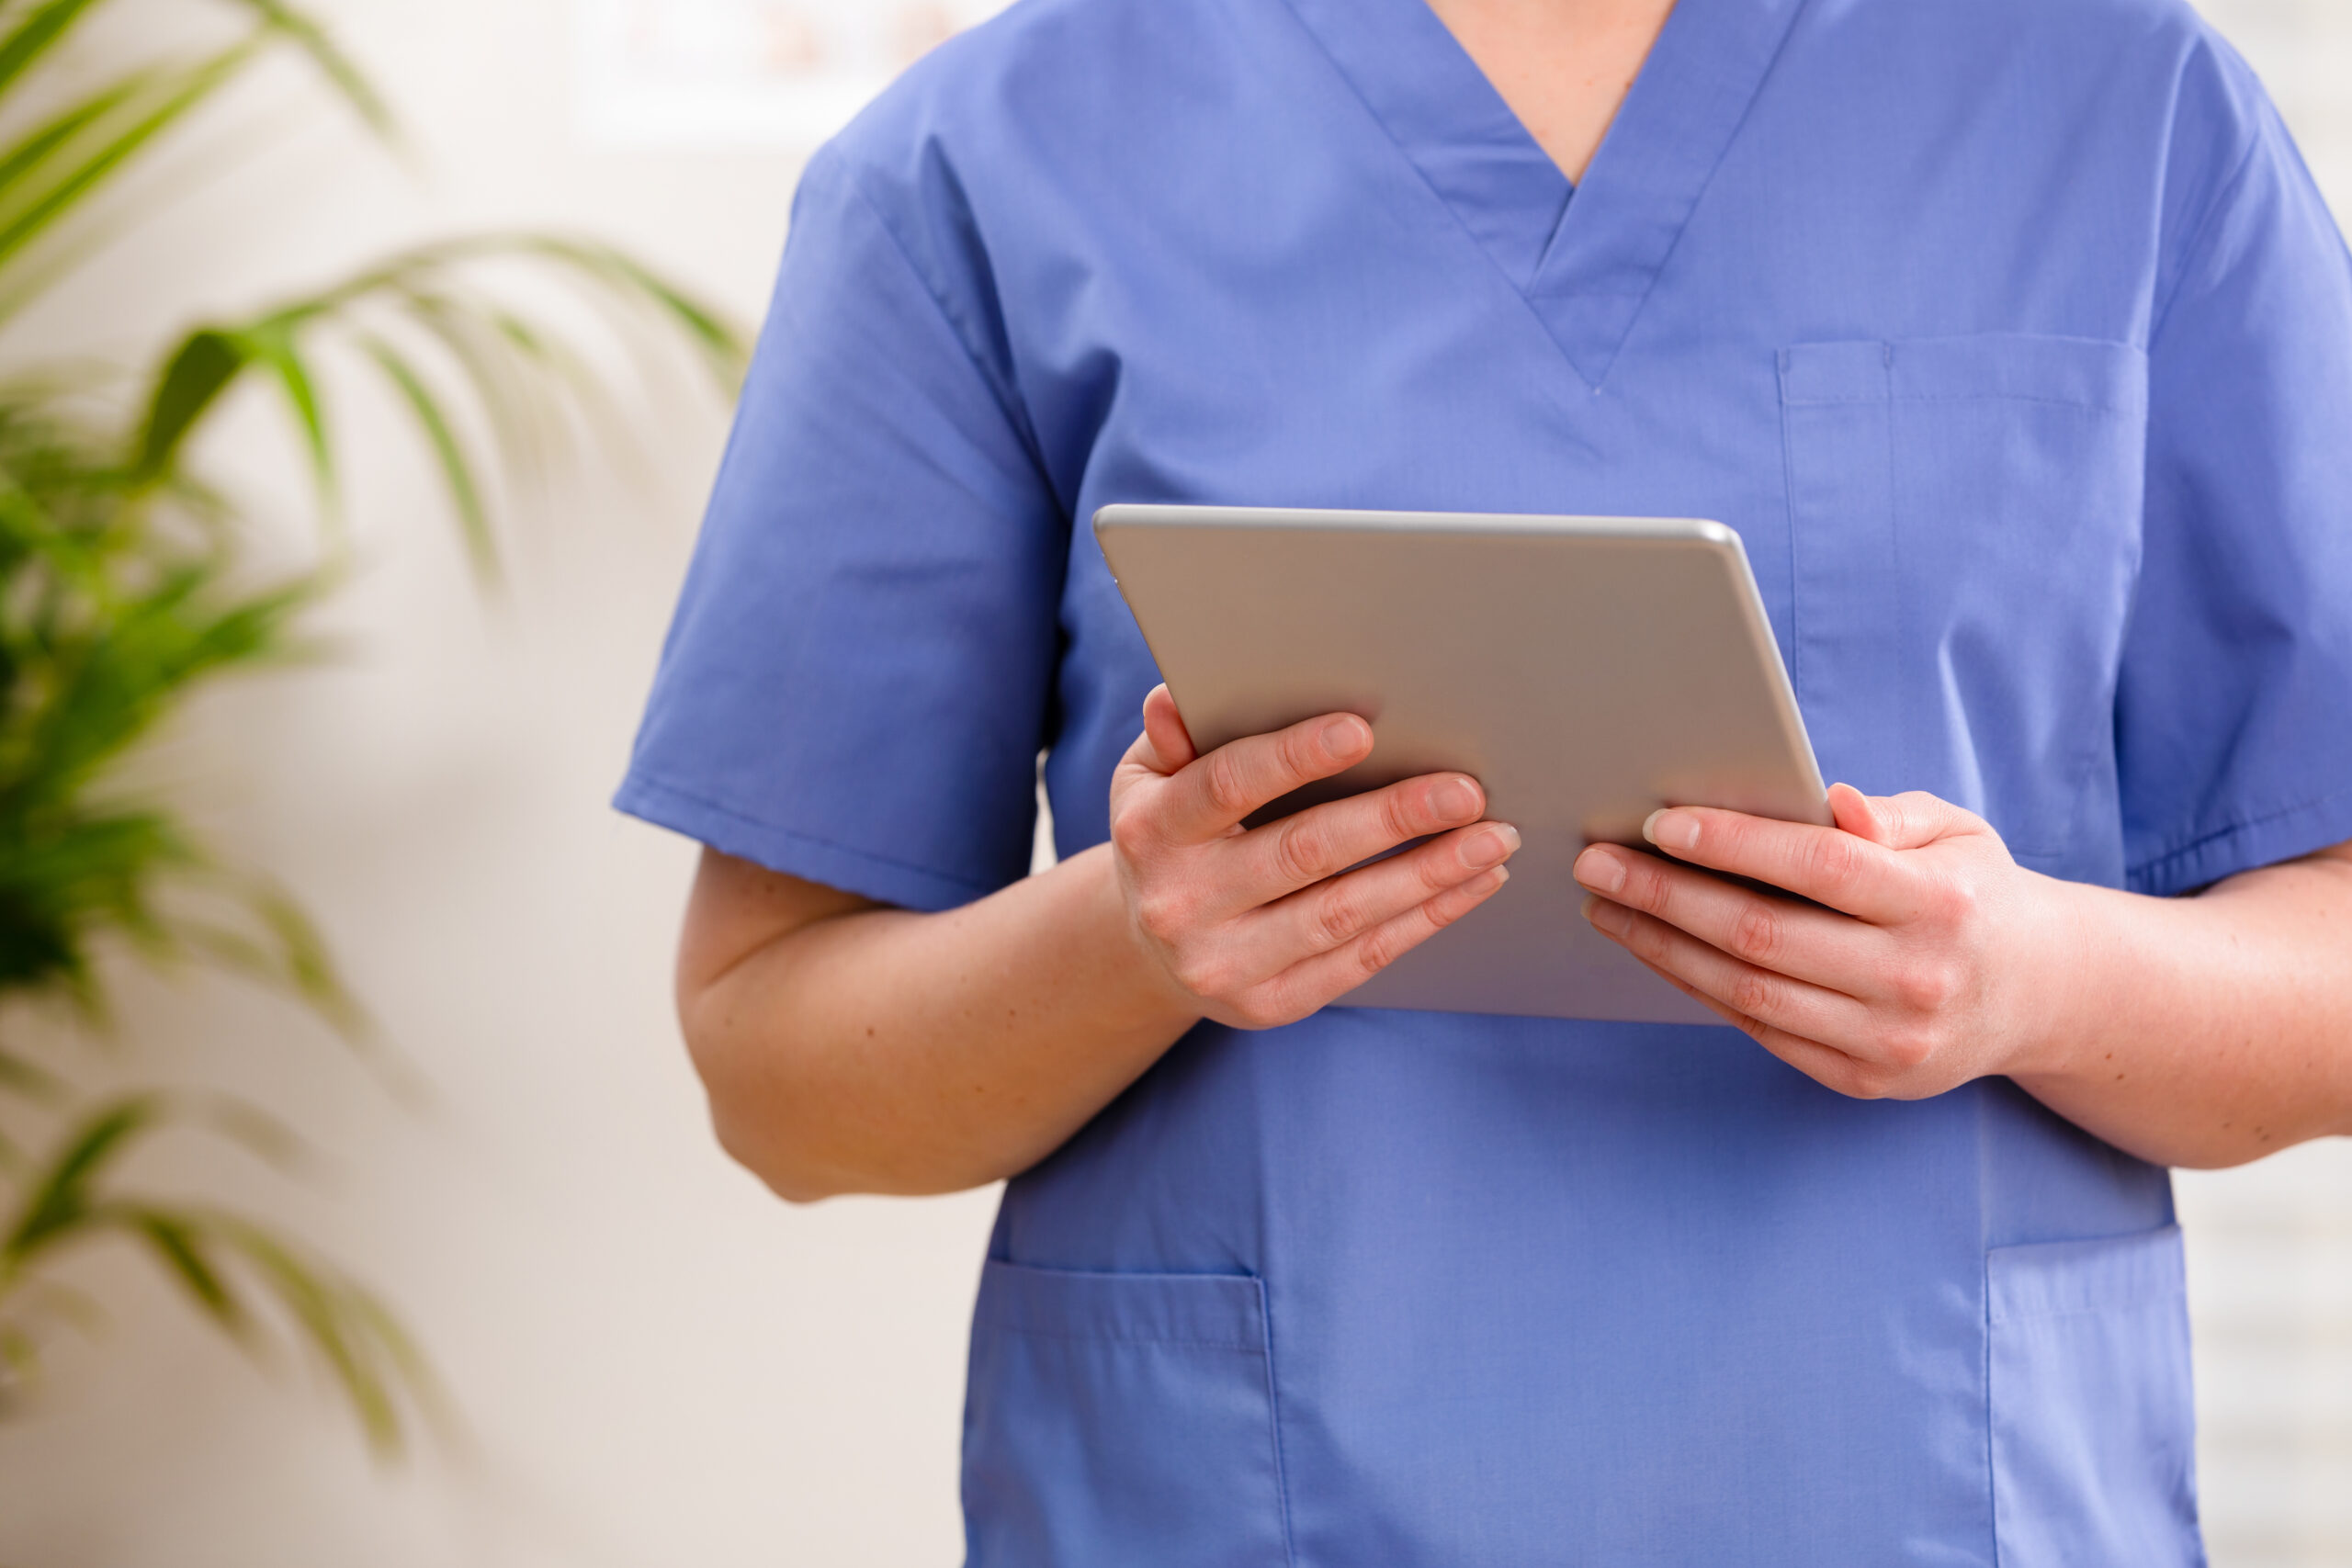 Female doctor or nurse looking at a digital image or report on a tablet in doctors office, climic or hospital. Technology in healthcare services.